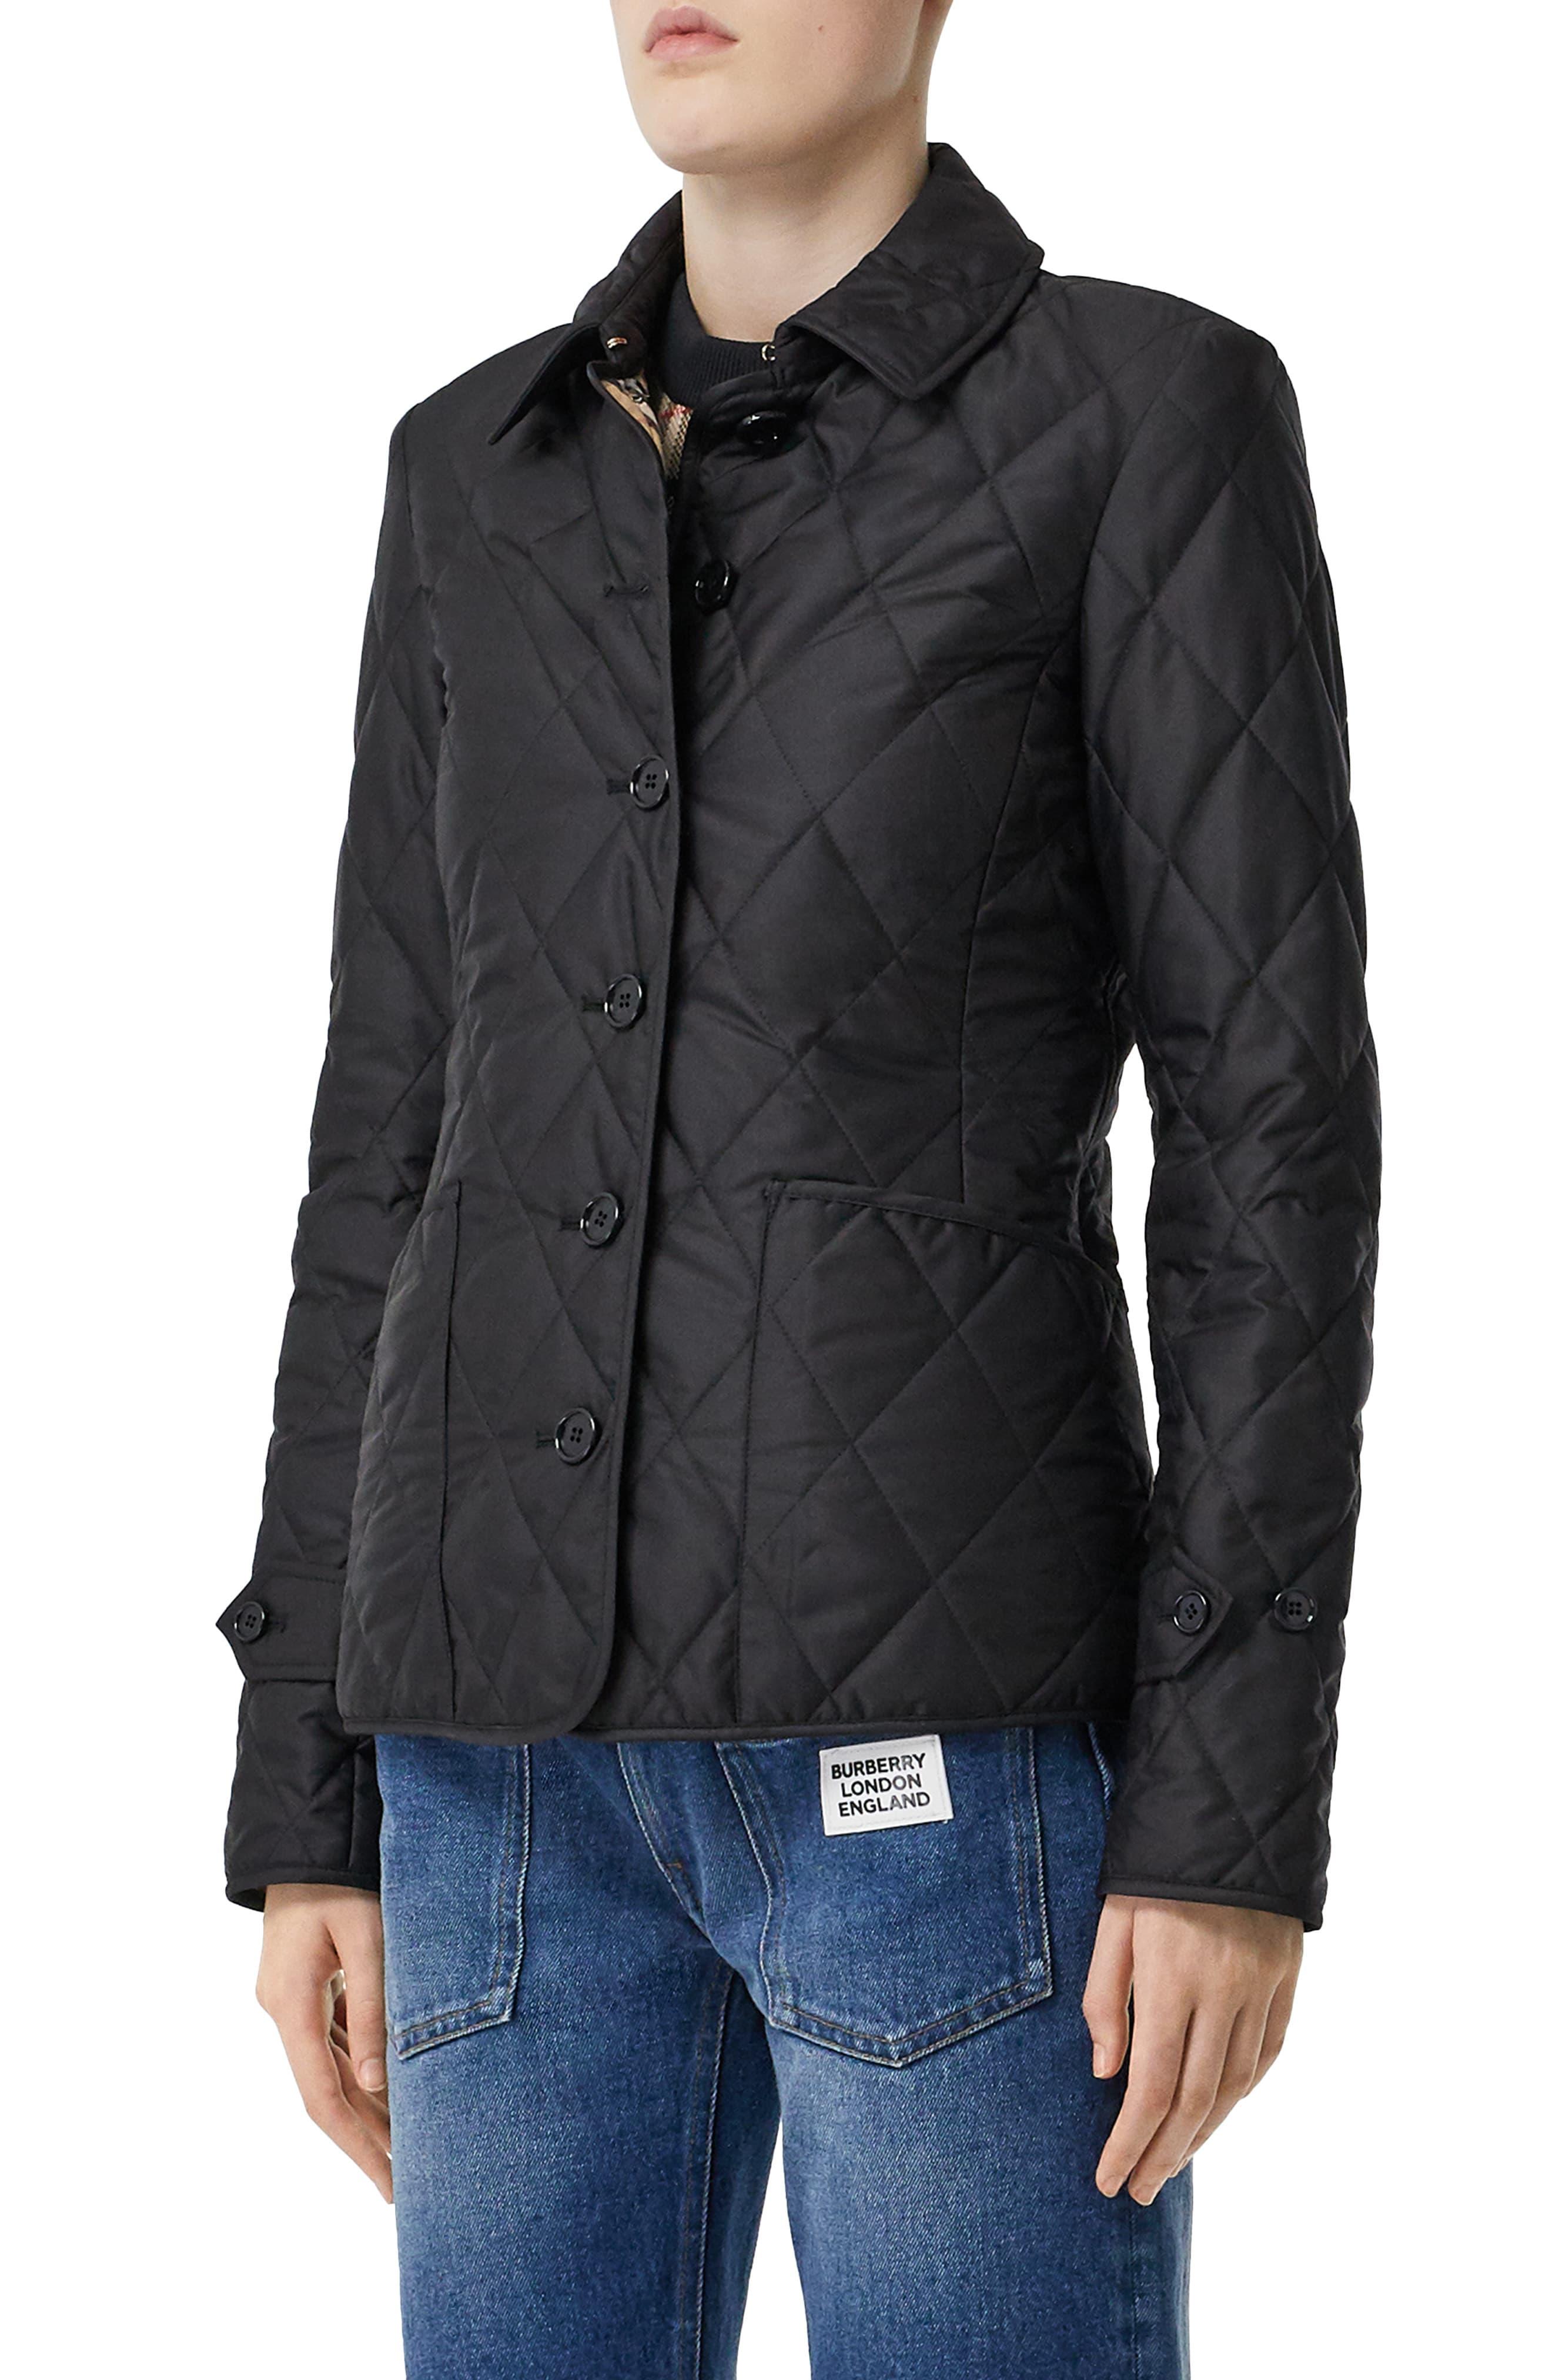 Burberry Synthetic Fernleigh Quilted Jacket in Black - Lyst